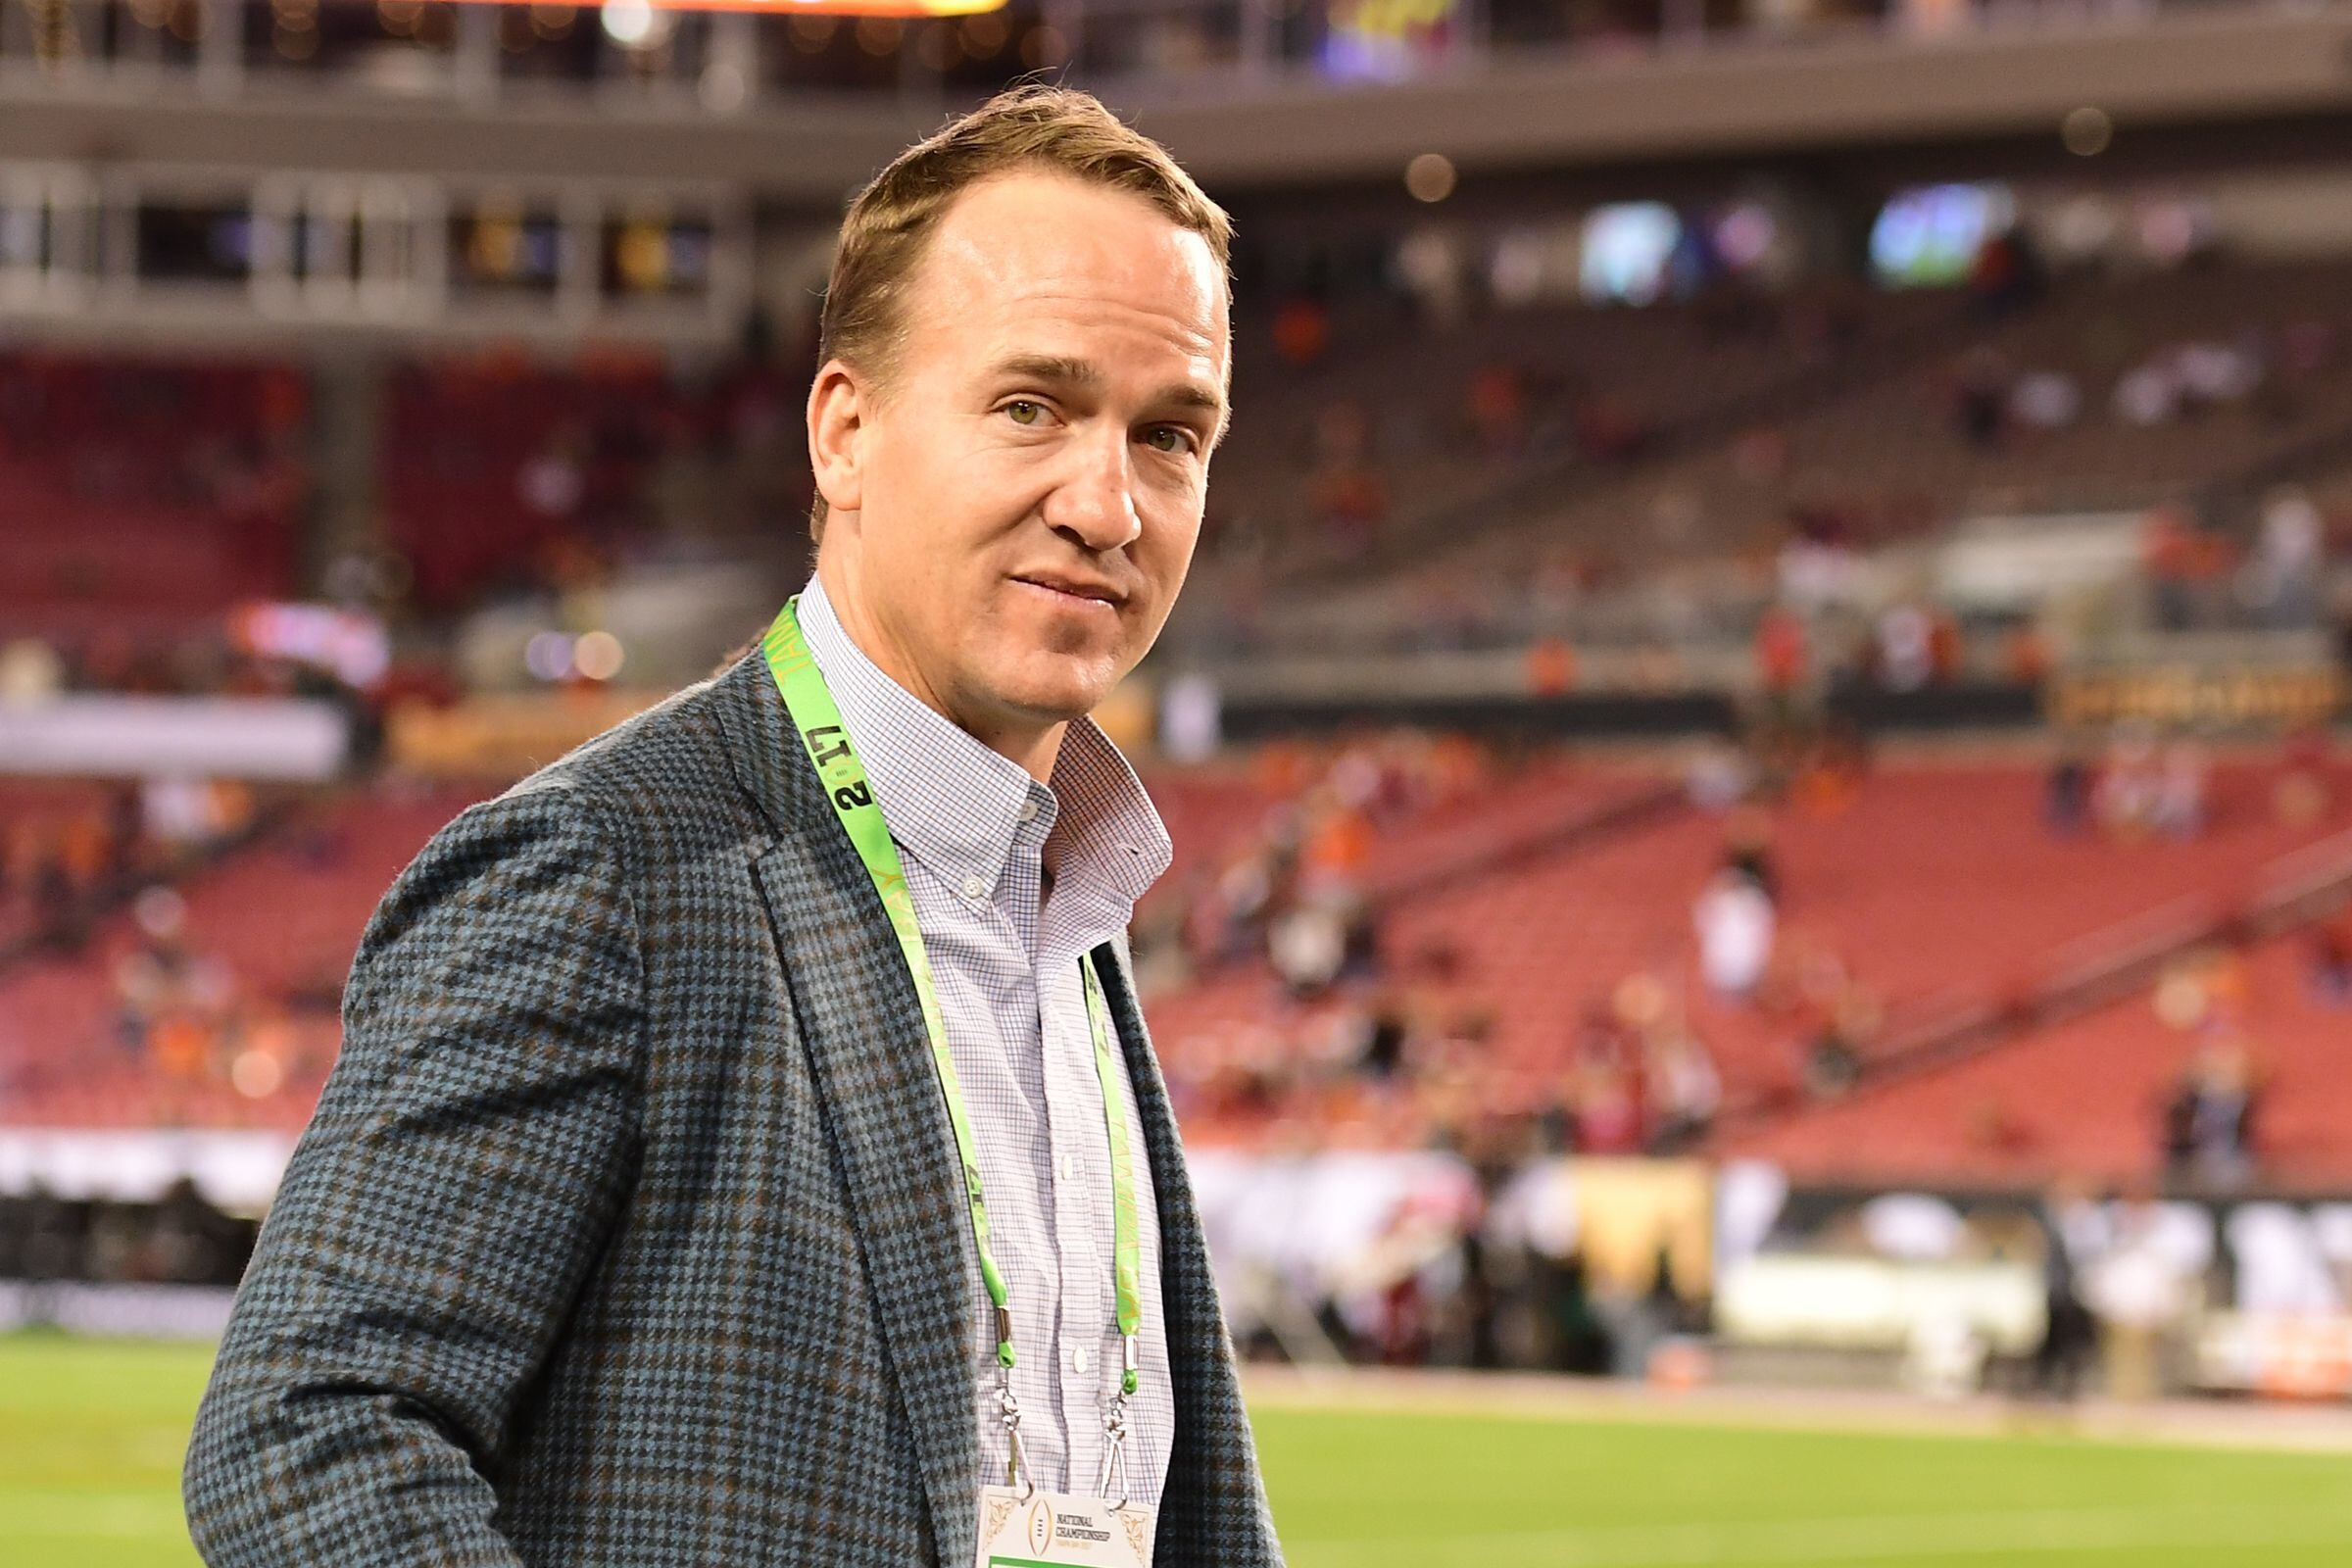 Peyton Manning will call an Eagles game on ESPN's 'Monday Night